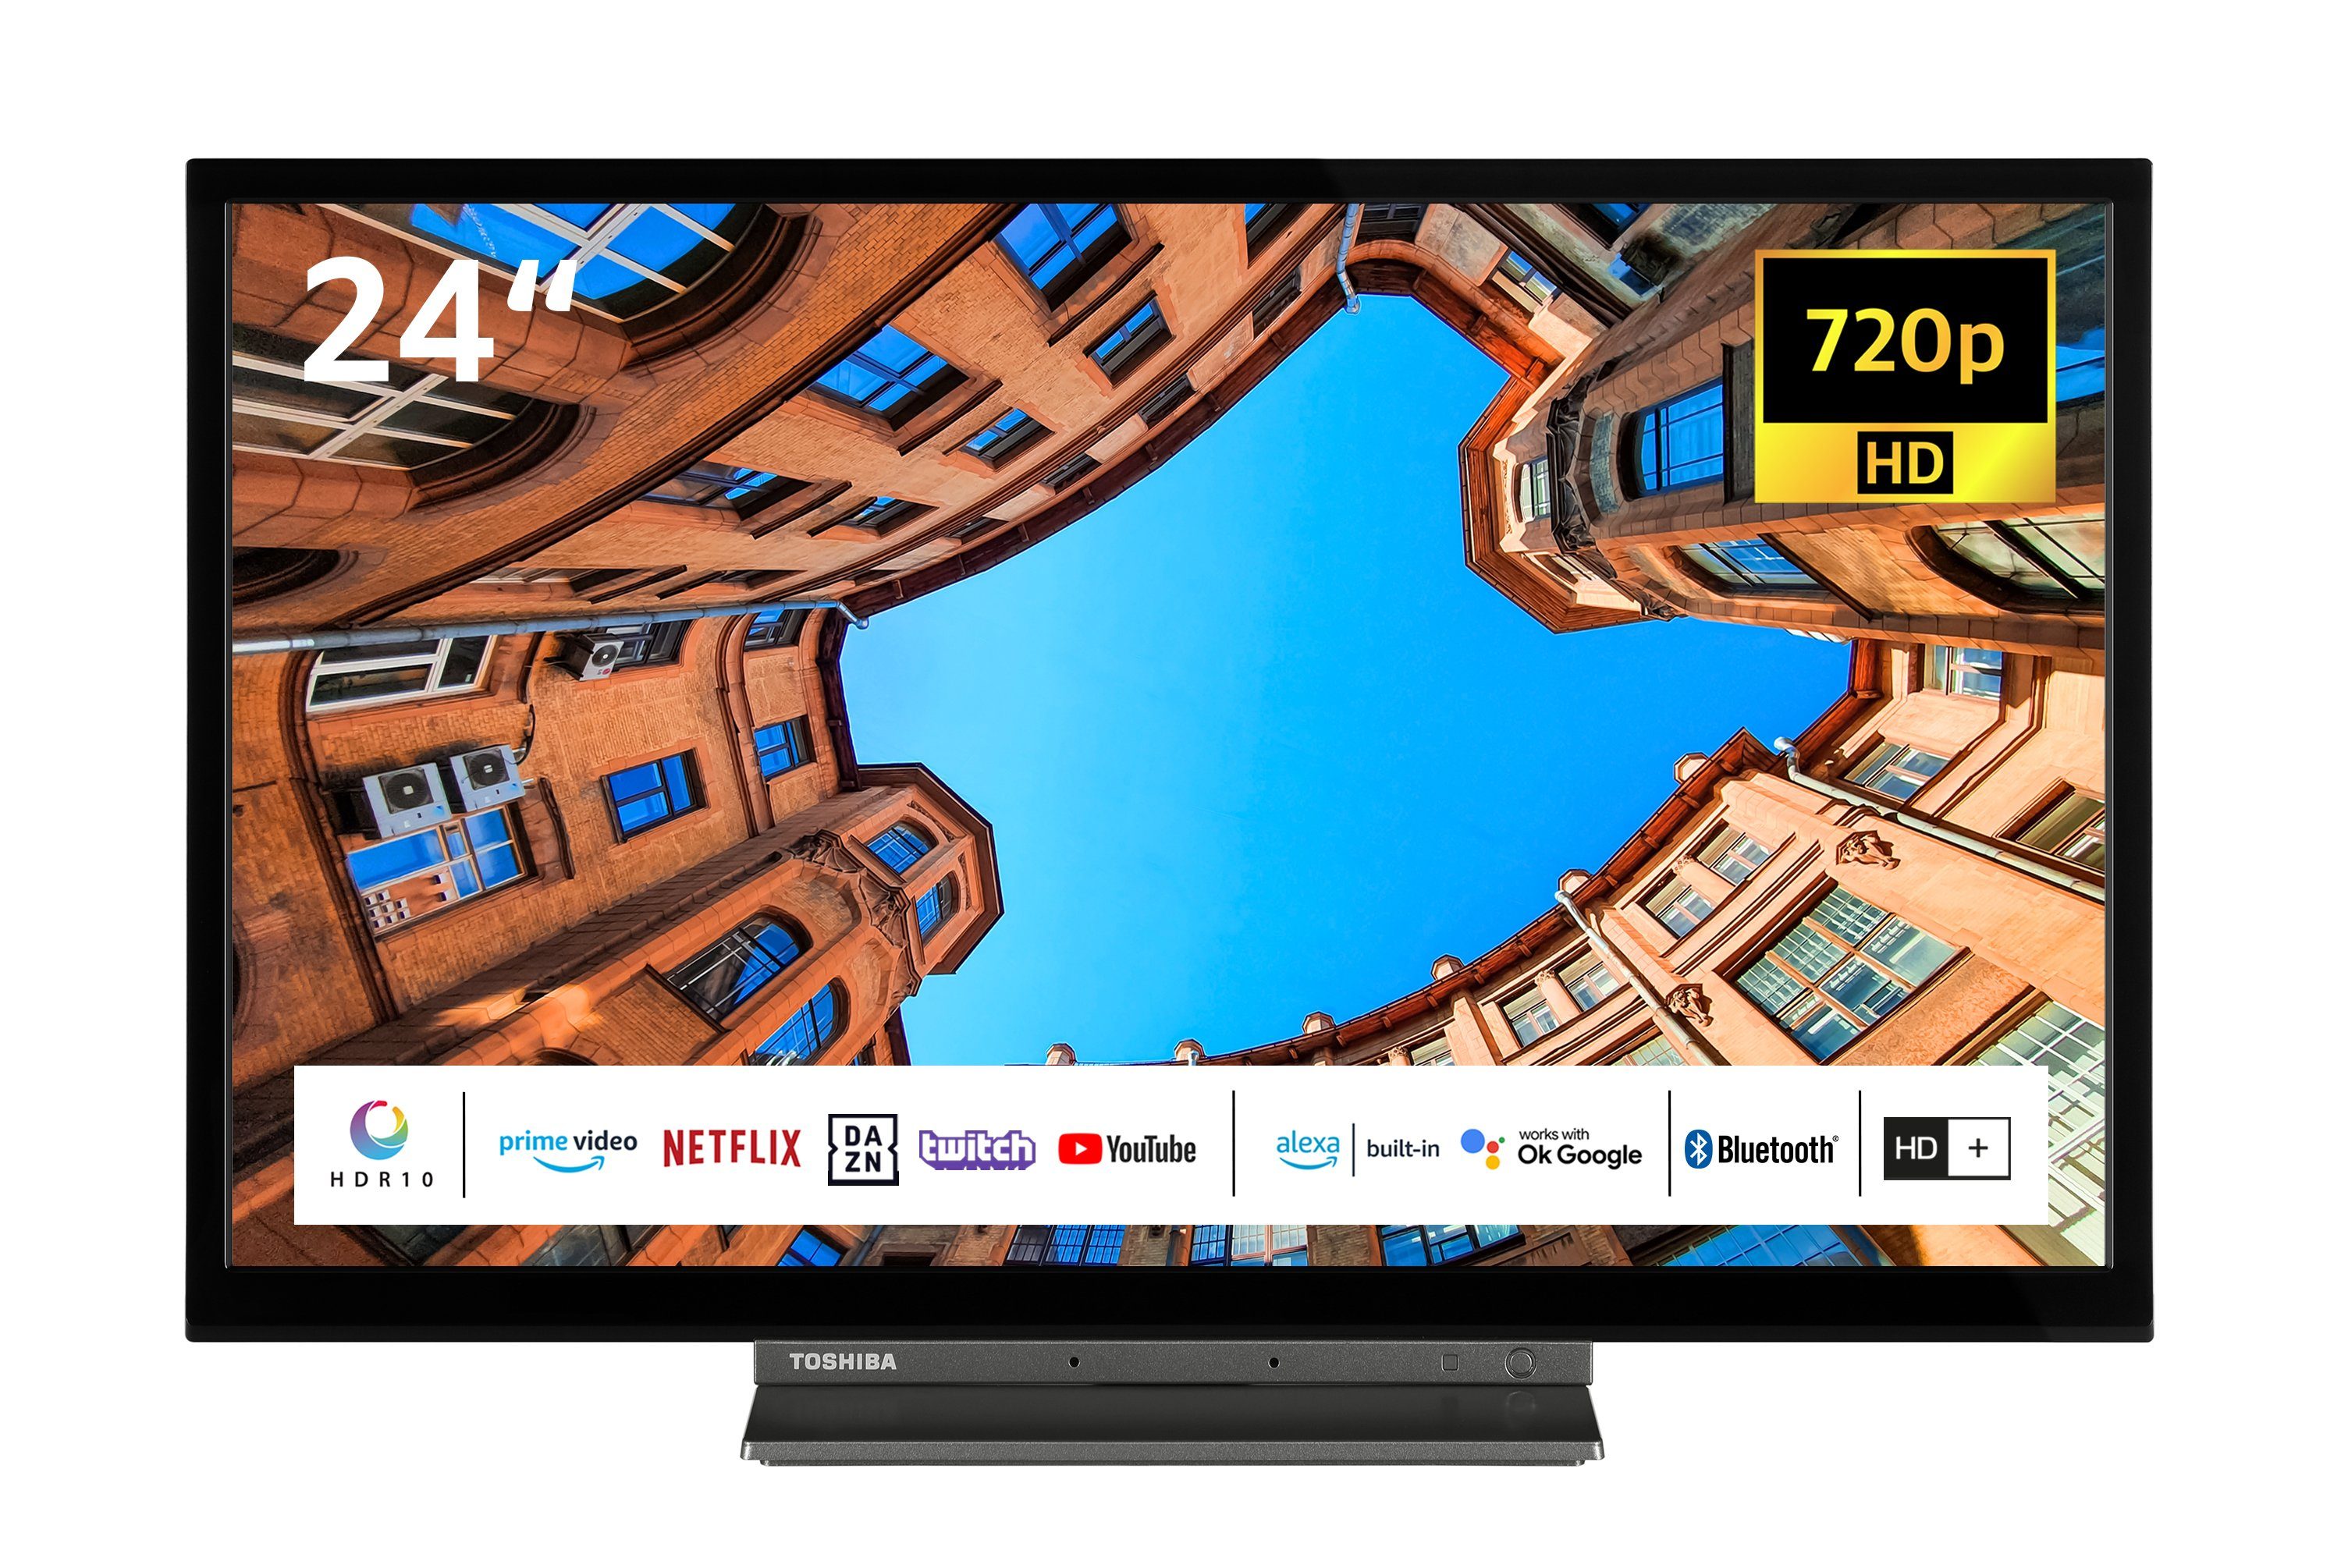 Triple-Tuner, Toshiba (60 Fernseher HD+ LCD-LED 6 cm/24 HDR, TV, Alexa Smart Zoll, 24WK3C63DAY/2 Monate HD-ready, inklusive) Built-In,